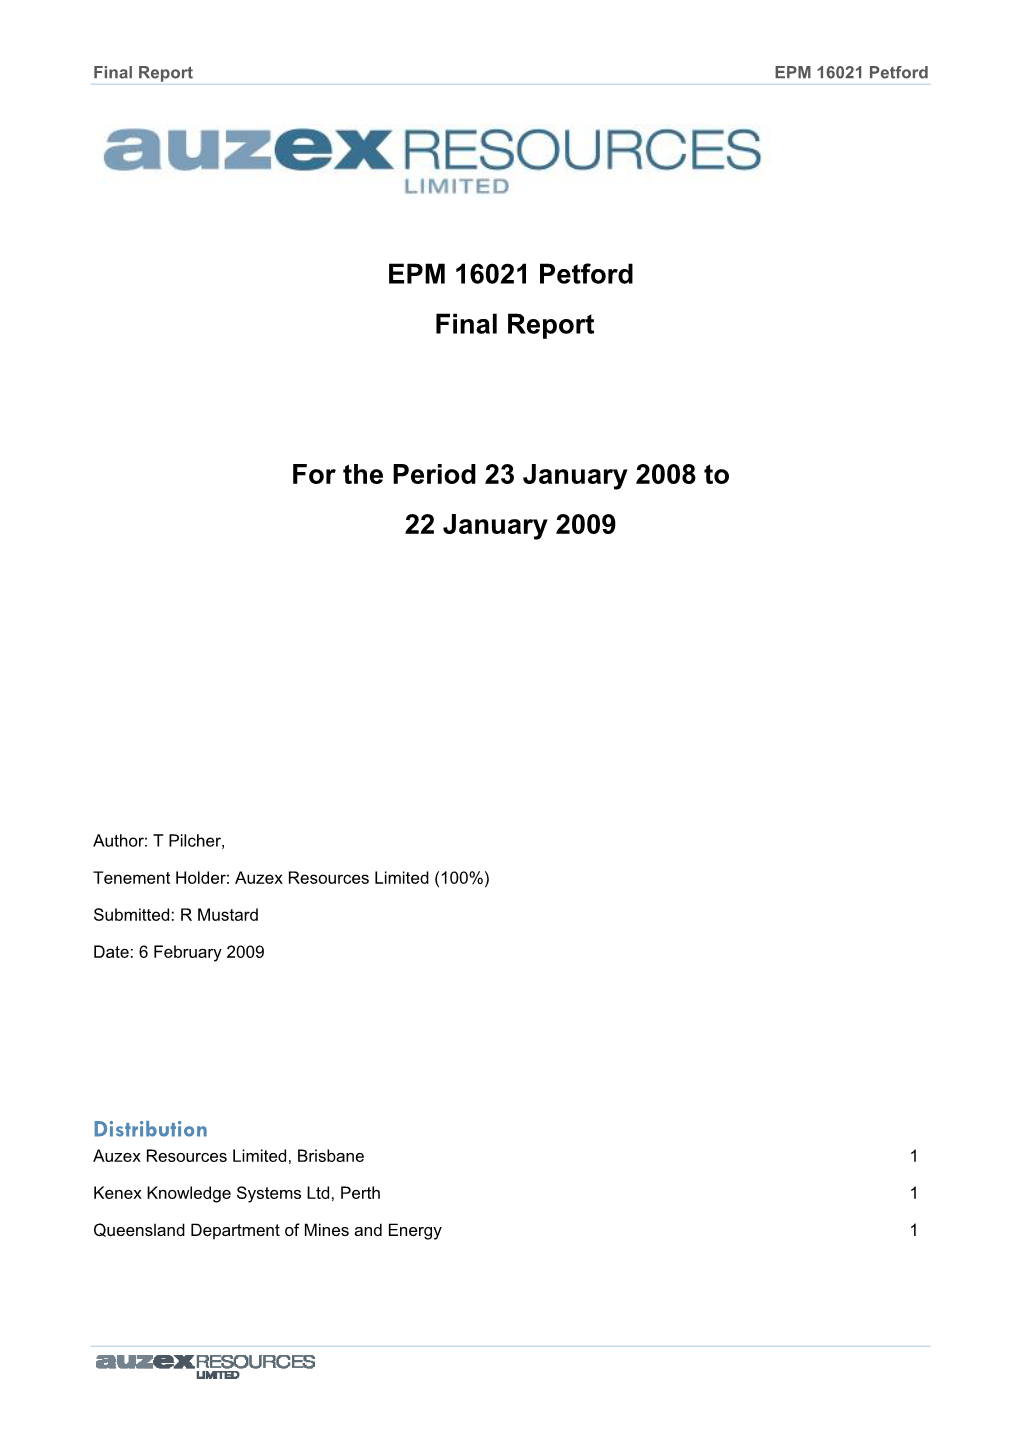 EPM 16021 Petford Final Report for the Period 23 January 2008 to 22